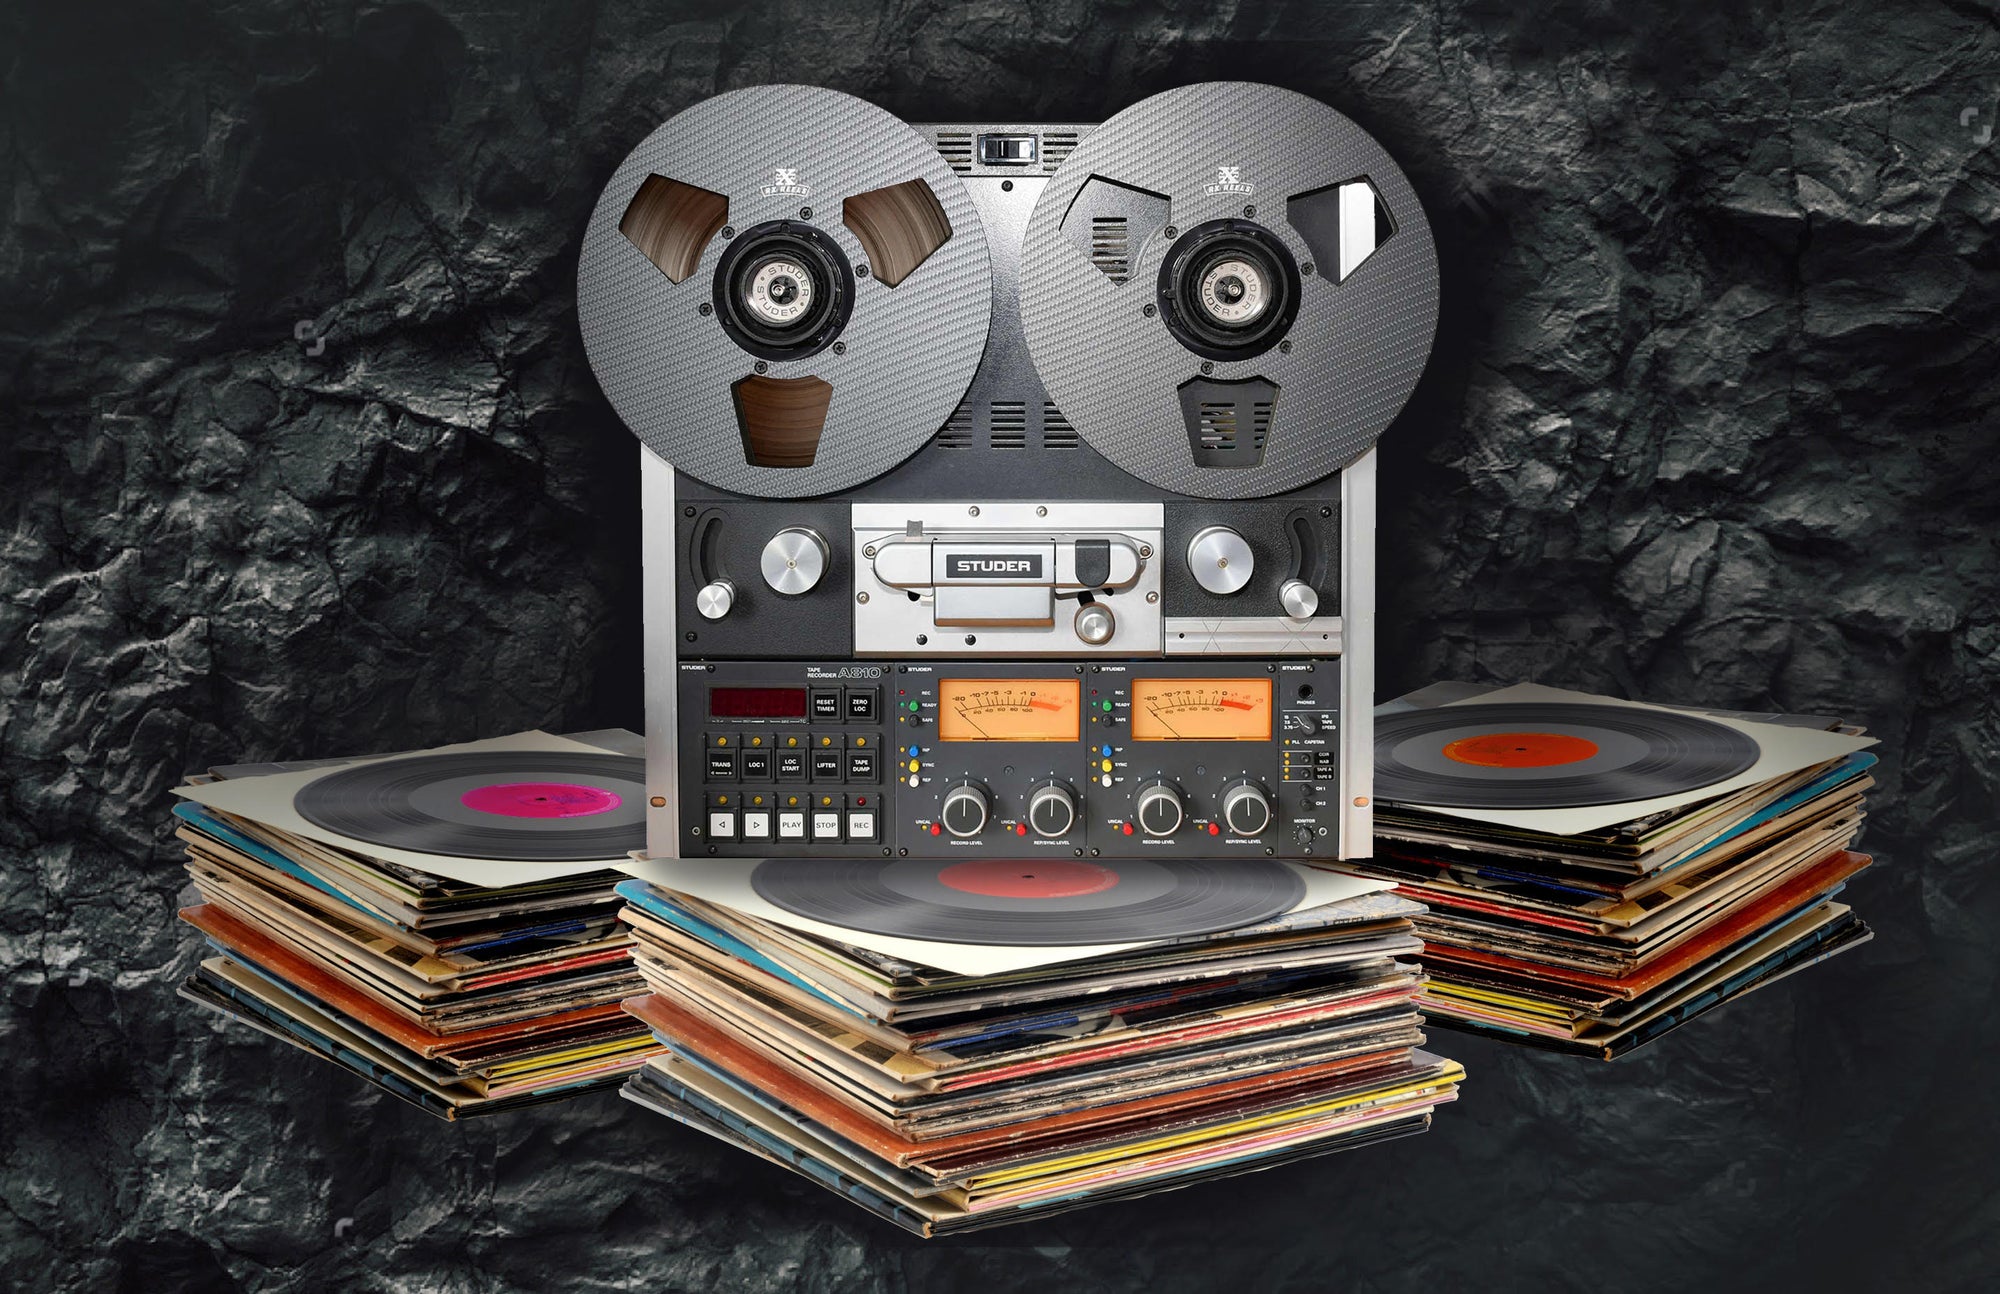 Reel to reel player sits atop a stack of vinyl LPs